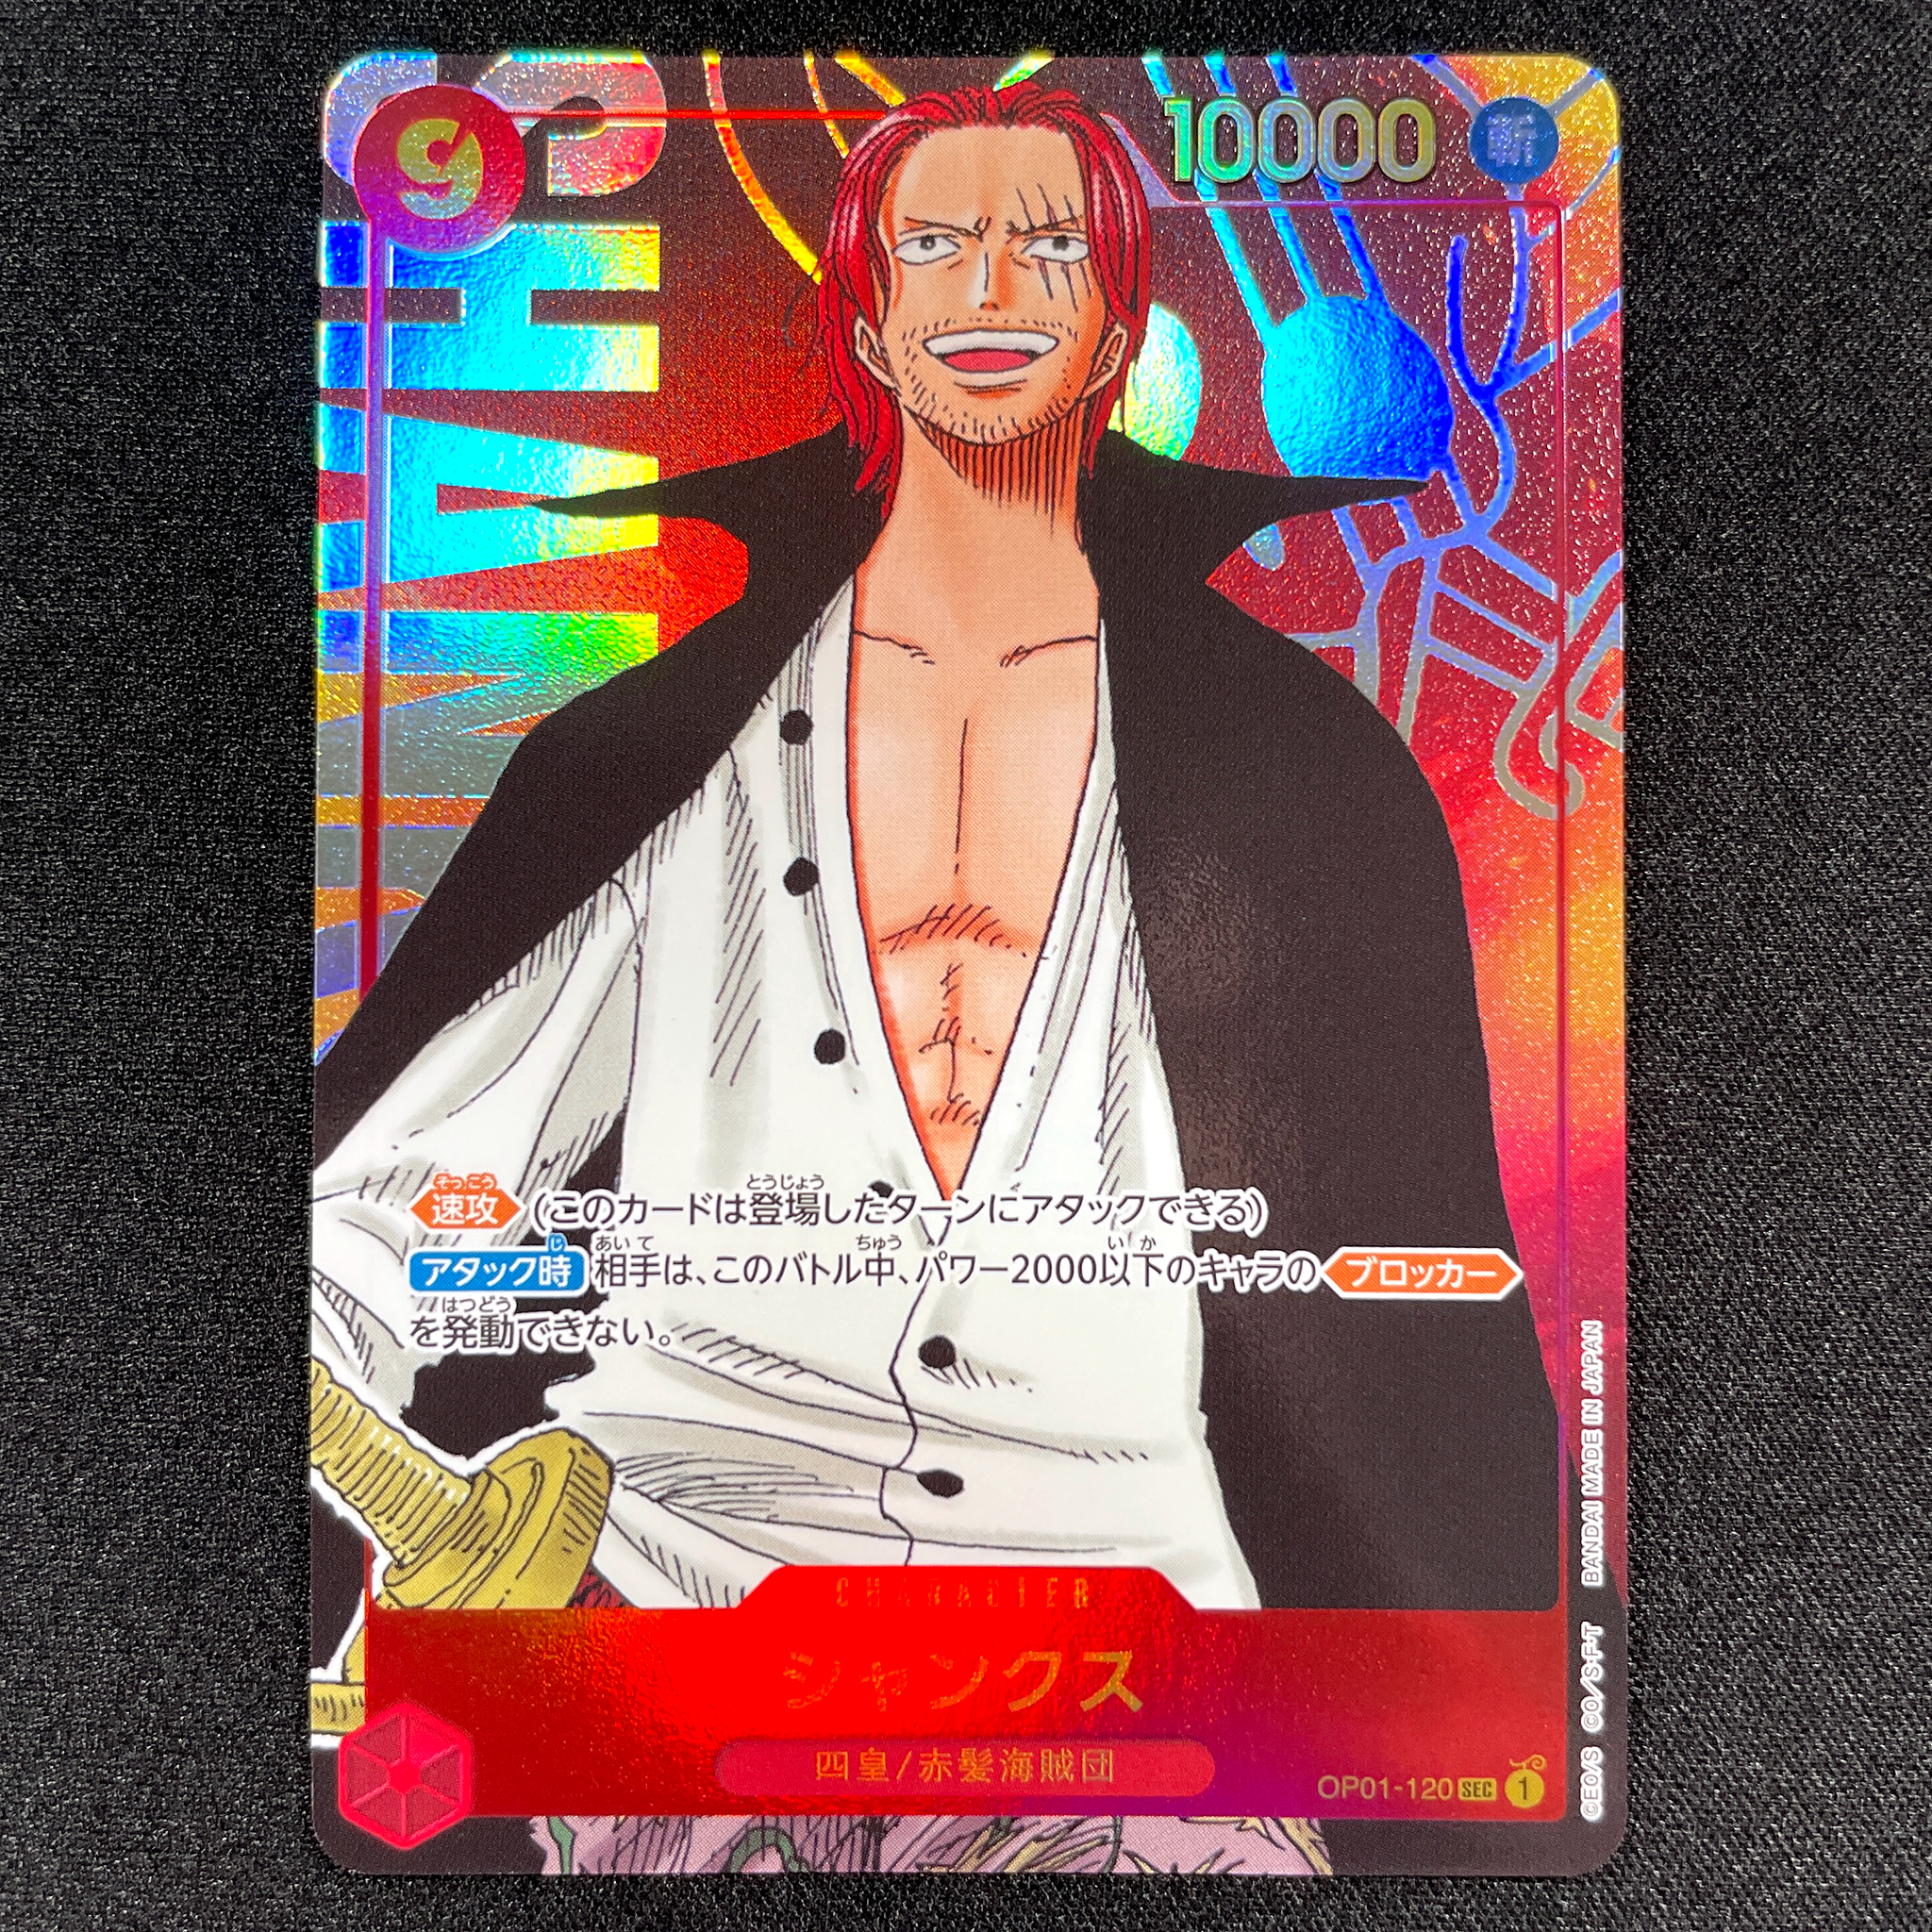 ONE PIECE CARD GAME ｢ROMANCE DAWN｣  ONE PIECE CARD GAME OP01-120 Secret Rare Parallel card  Shanks